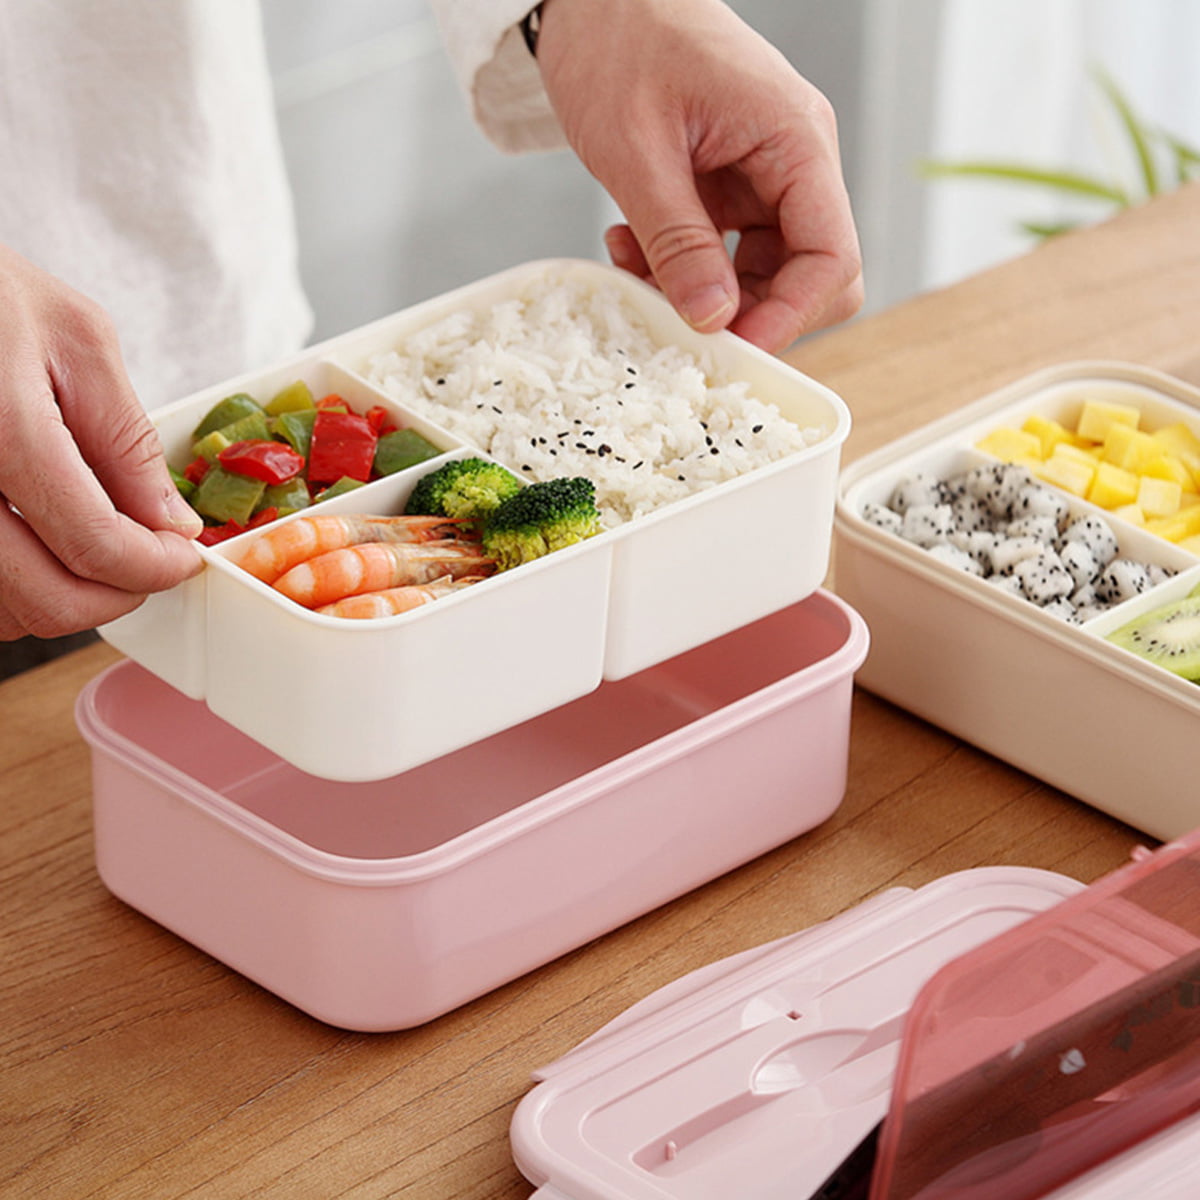 WQJNWEQ Clearance Stackable Bento Box,Lunch Box Kit With Spoon & Fork,  3-In-1 Compartment Whea-t Straw Meal Prep Containers,Leakproof Eco-Friendly